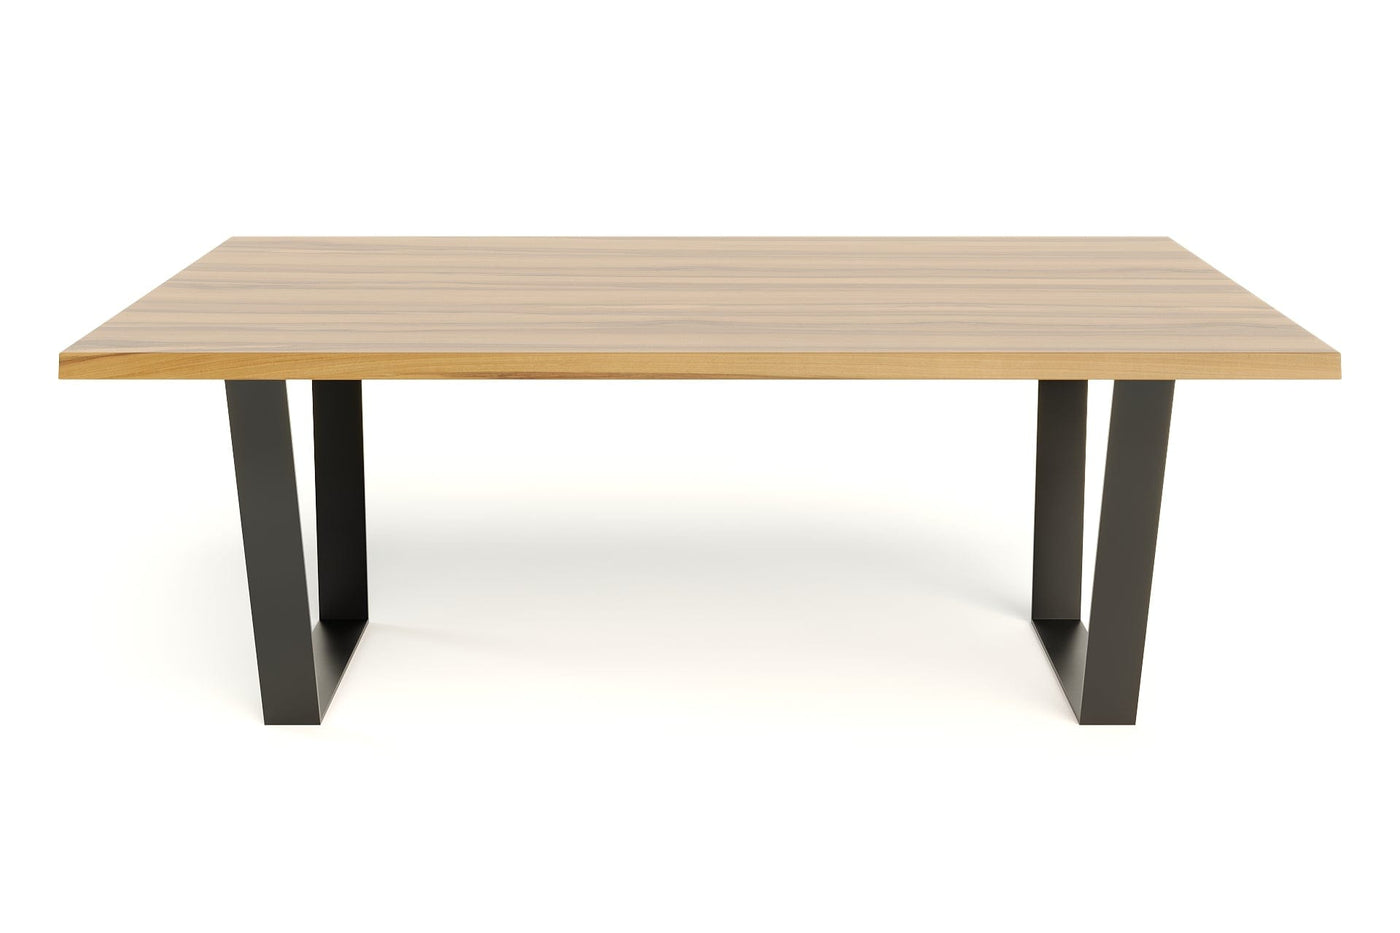 Segovia Dining Table - 6 px - Made to Order